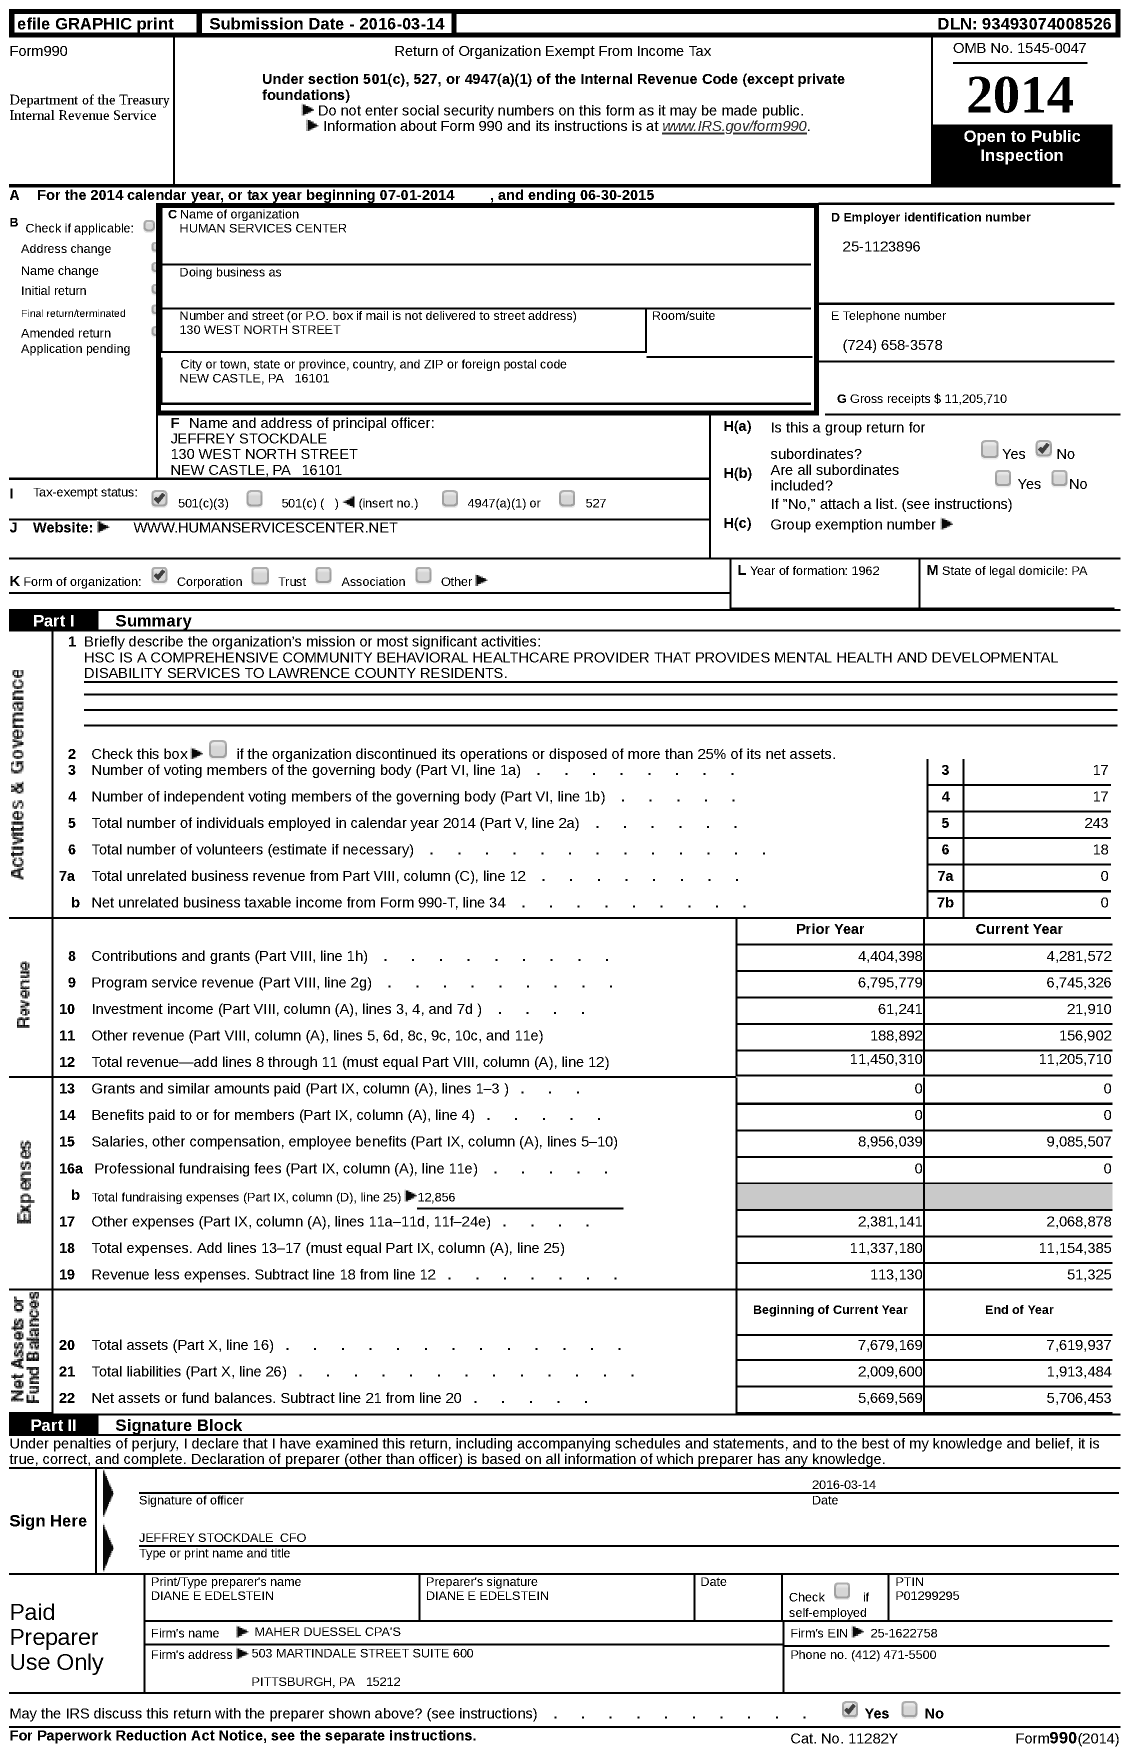 Image of first page of 2014 Form 990 for Human Services Center (HSC)